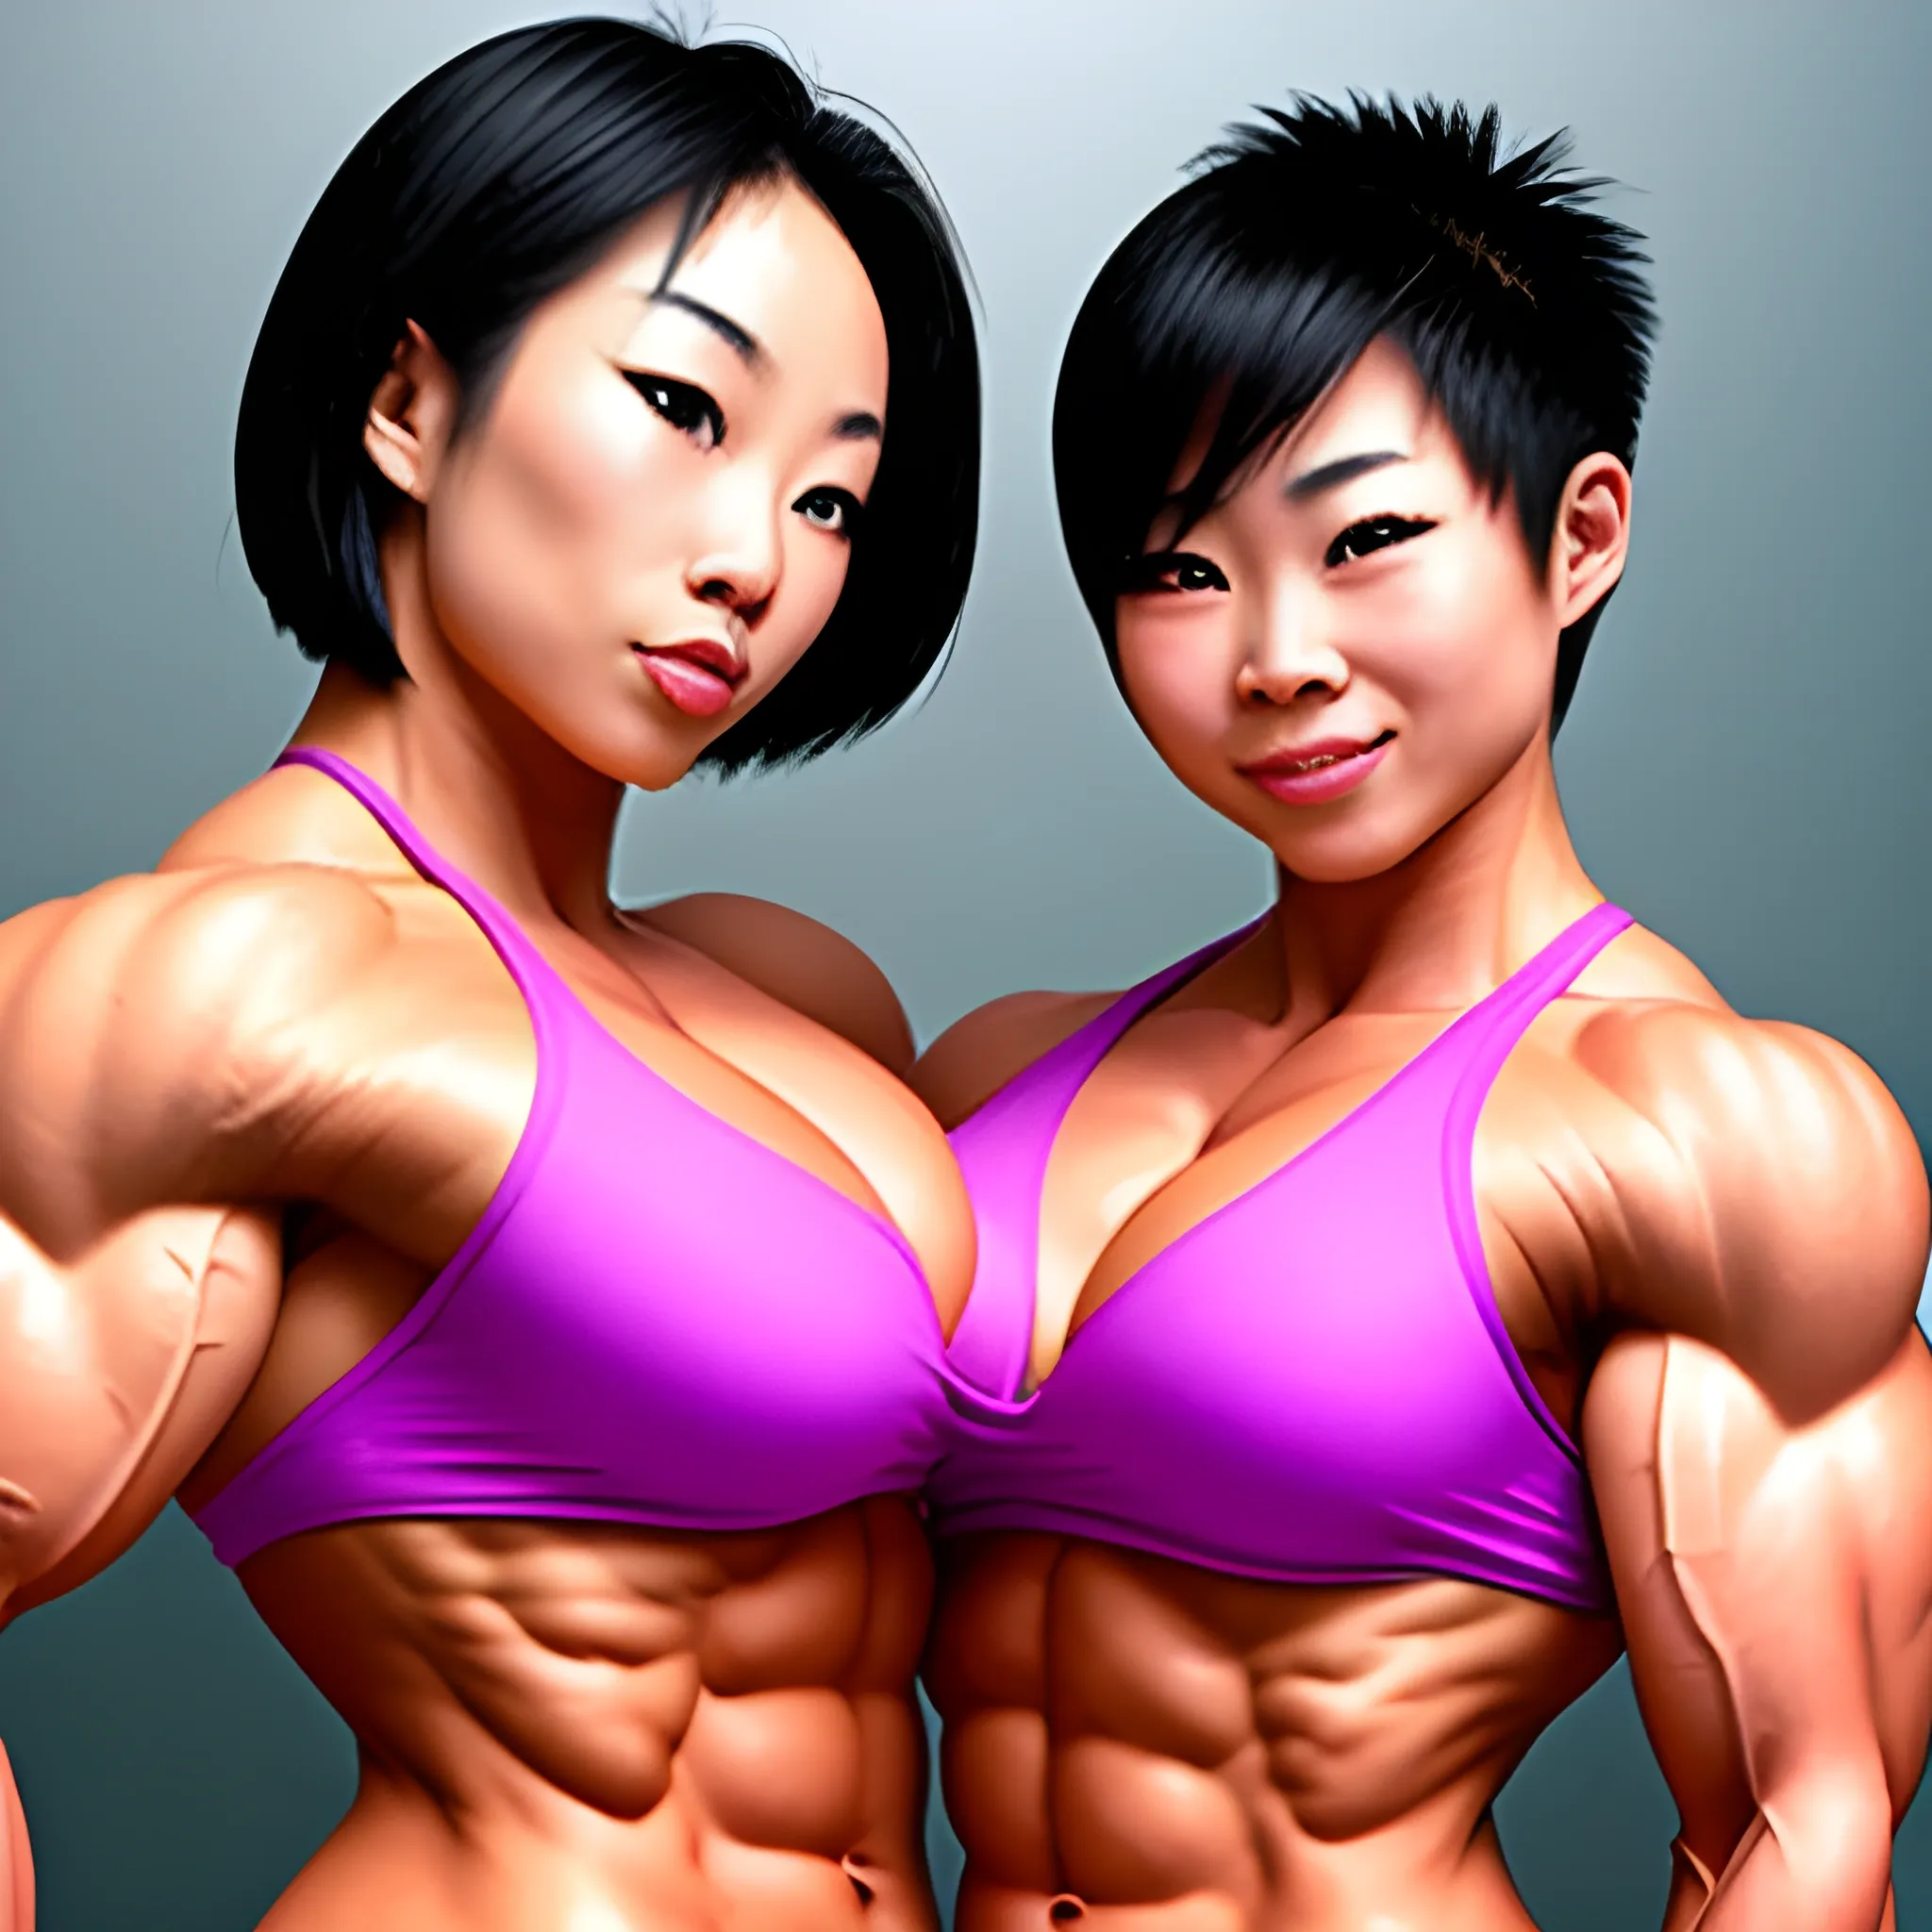 Two Sexy Asian Female Bodybuilders Kissing They Have Short Hair Arthub Ai